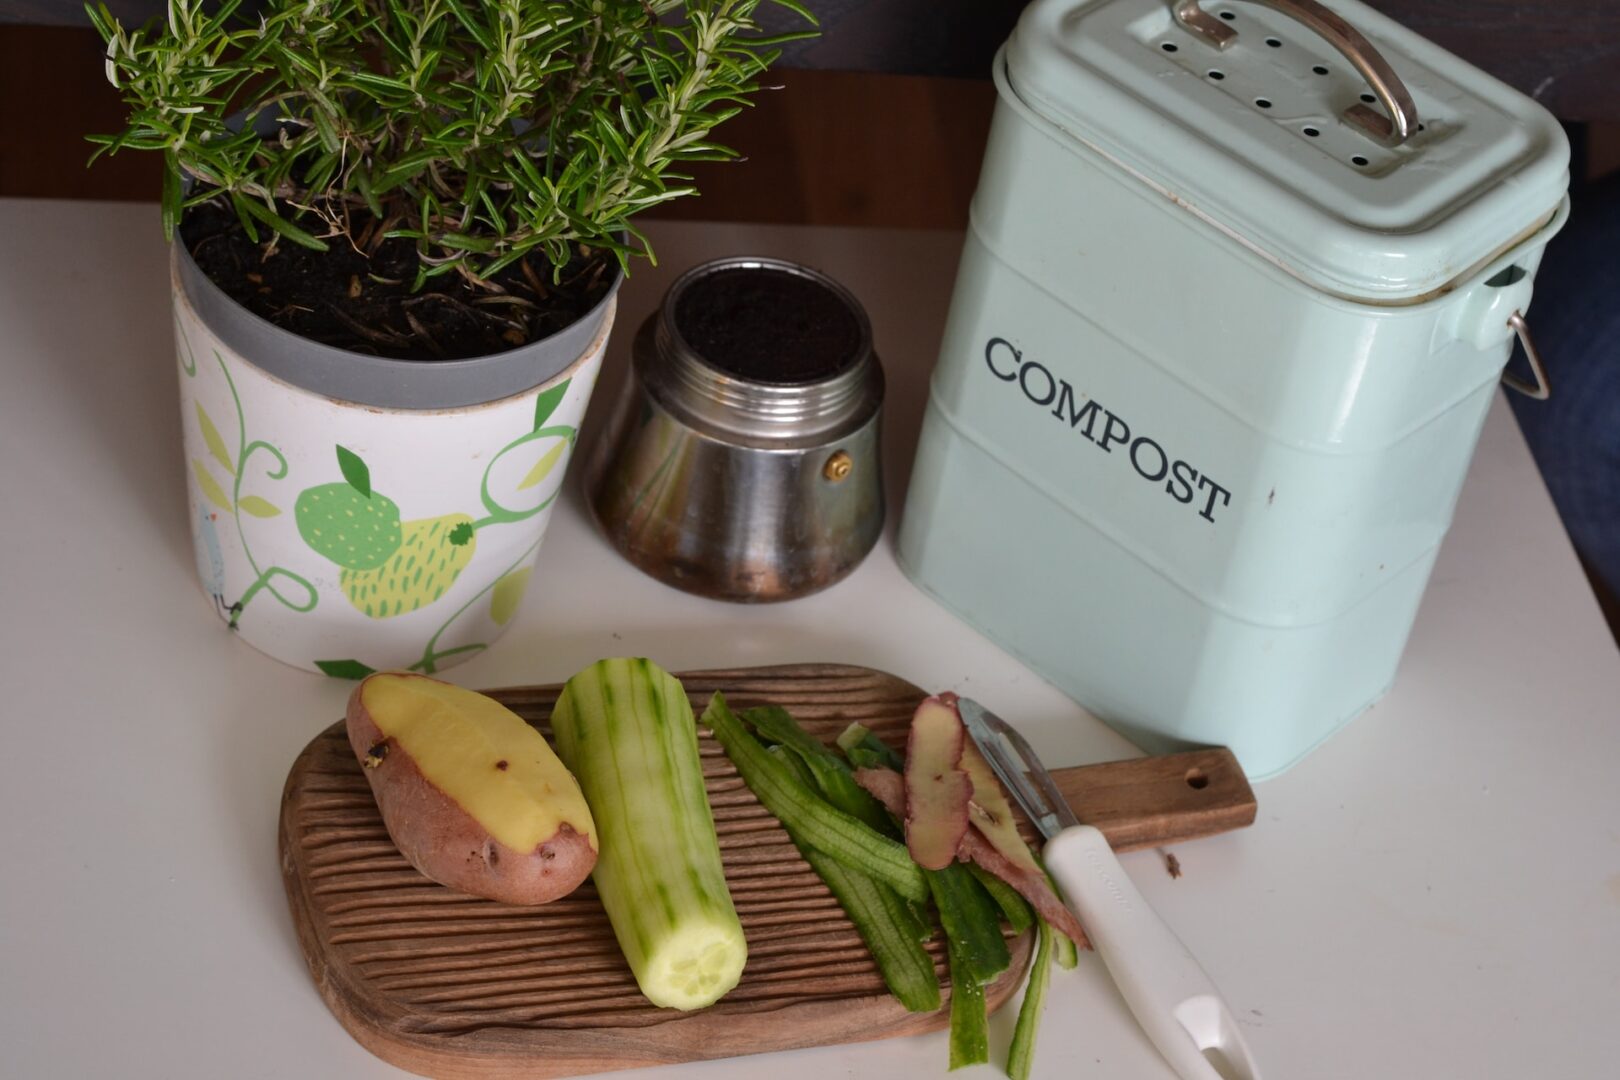 green plant on a white and purple floral ceramic pot. Also a cutting board with peeled vegetables and a compost bin.